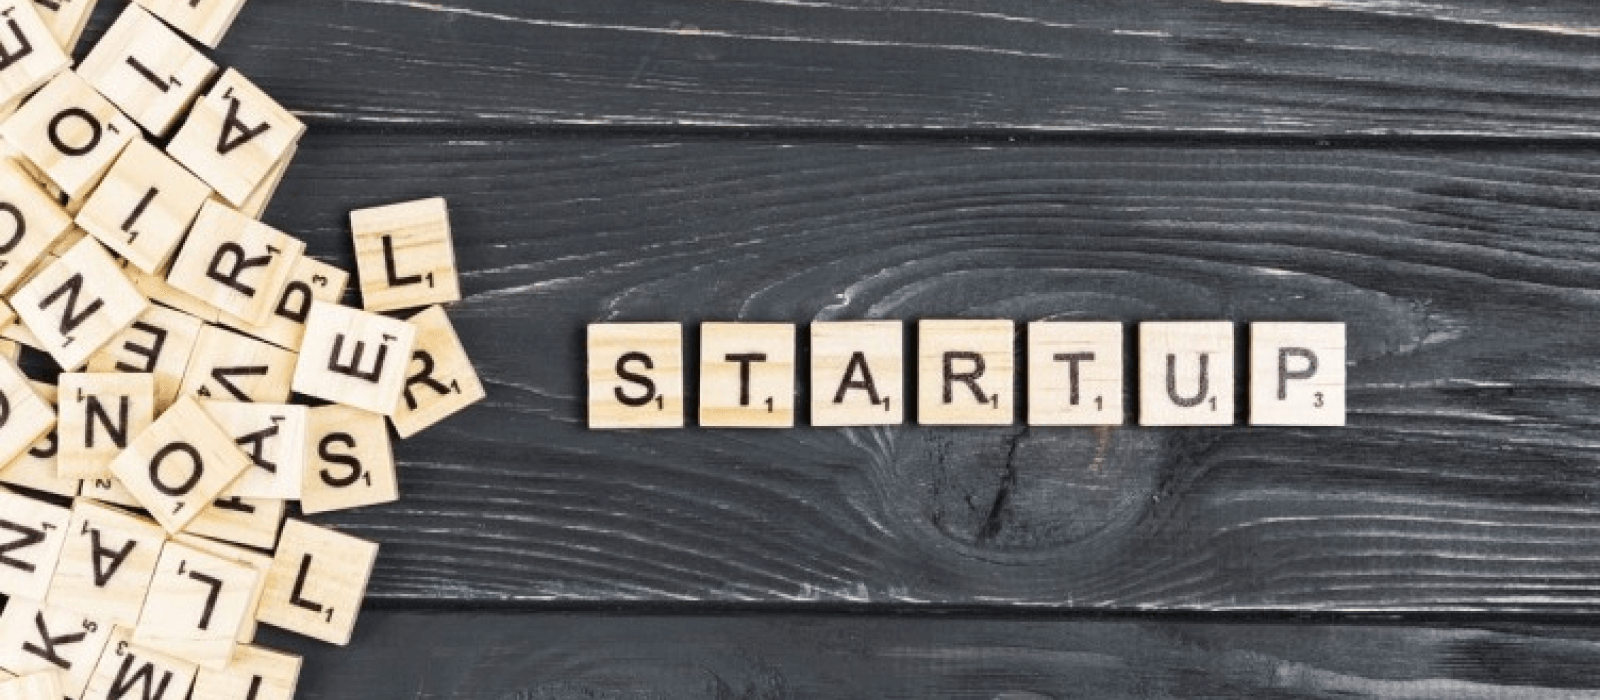 Key Terms Every Startup Founder Should Know